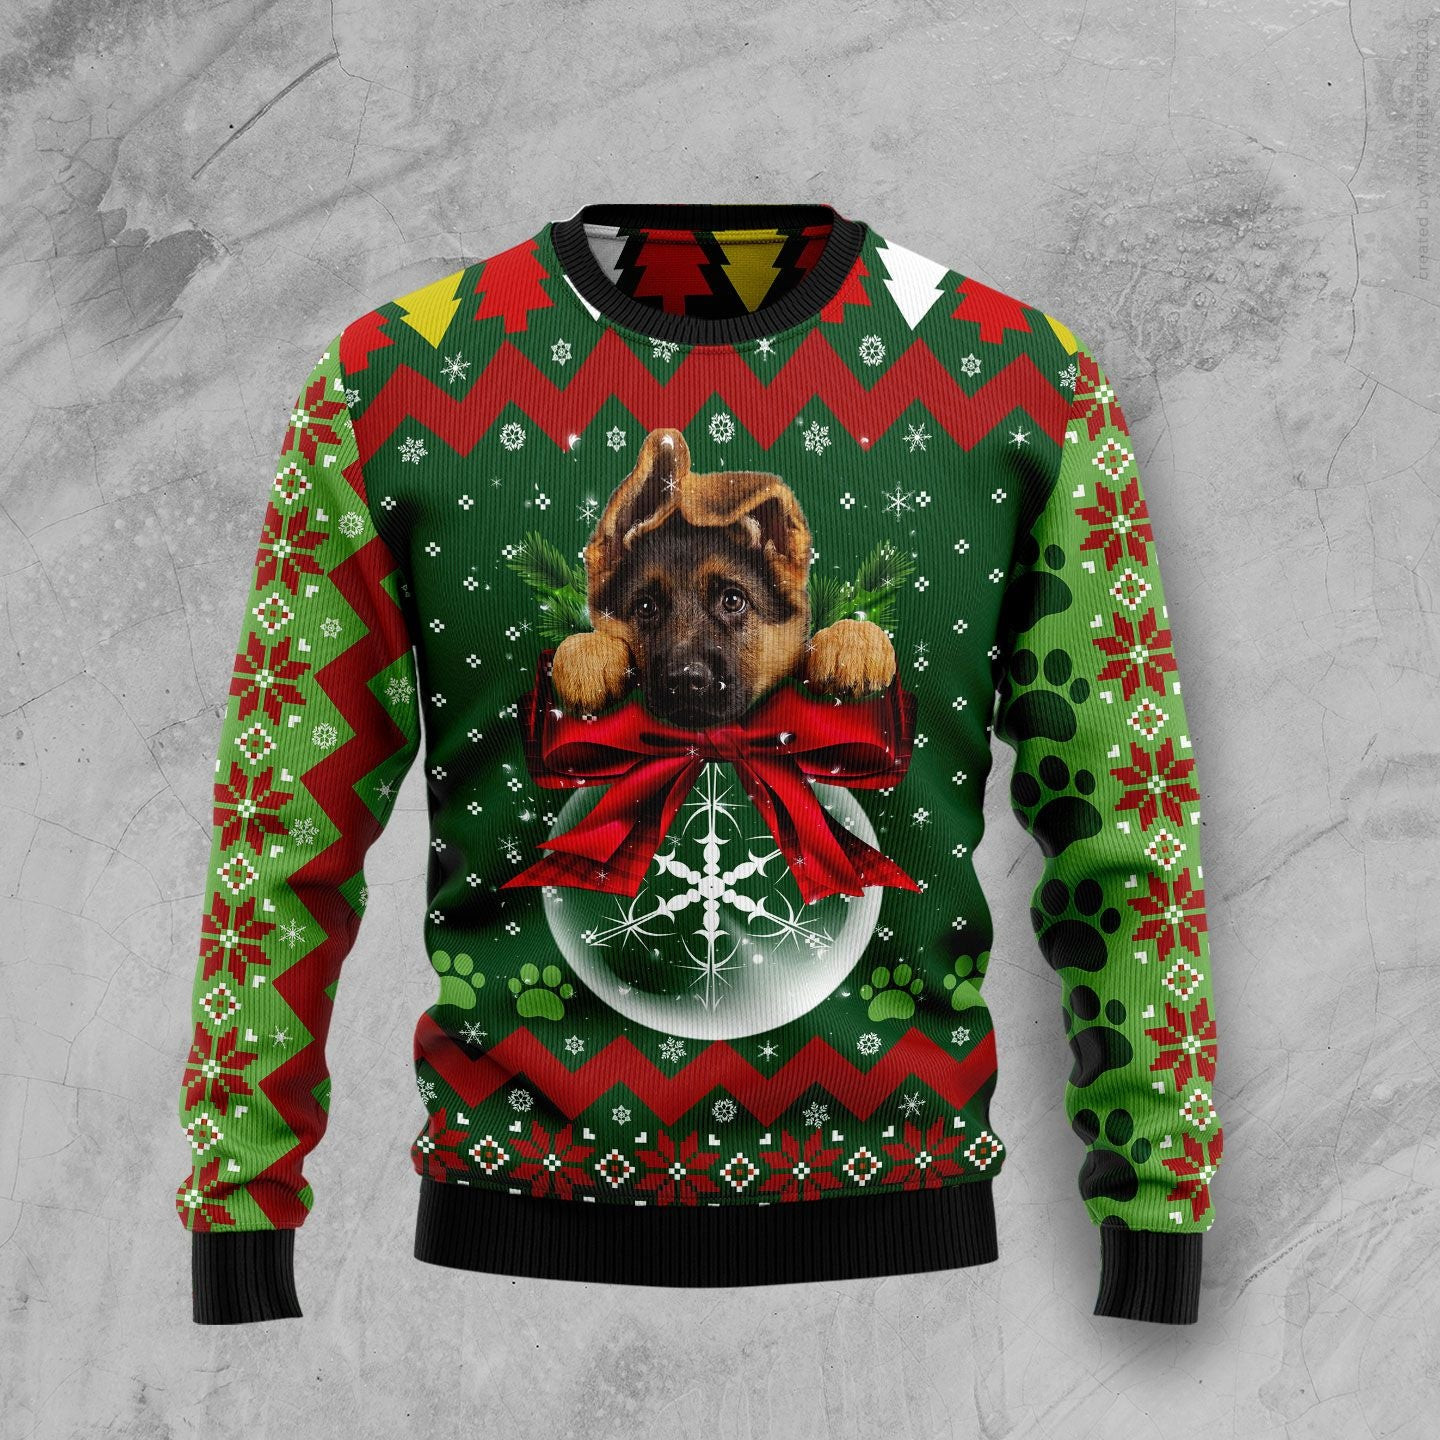 German Shepherd Christmas Ugly Christmas Sweater, Ugly Sweater For Men Women, Holiday Sweater